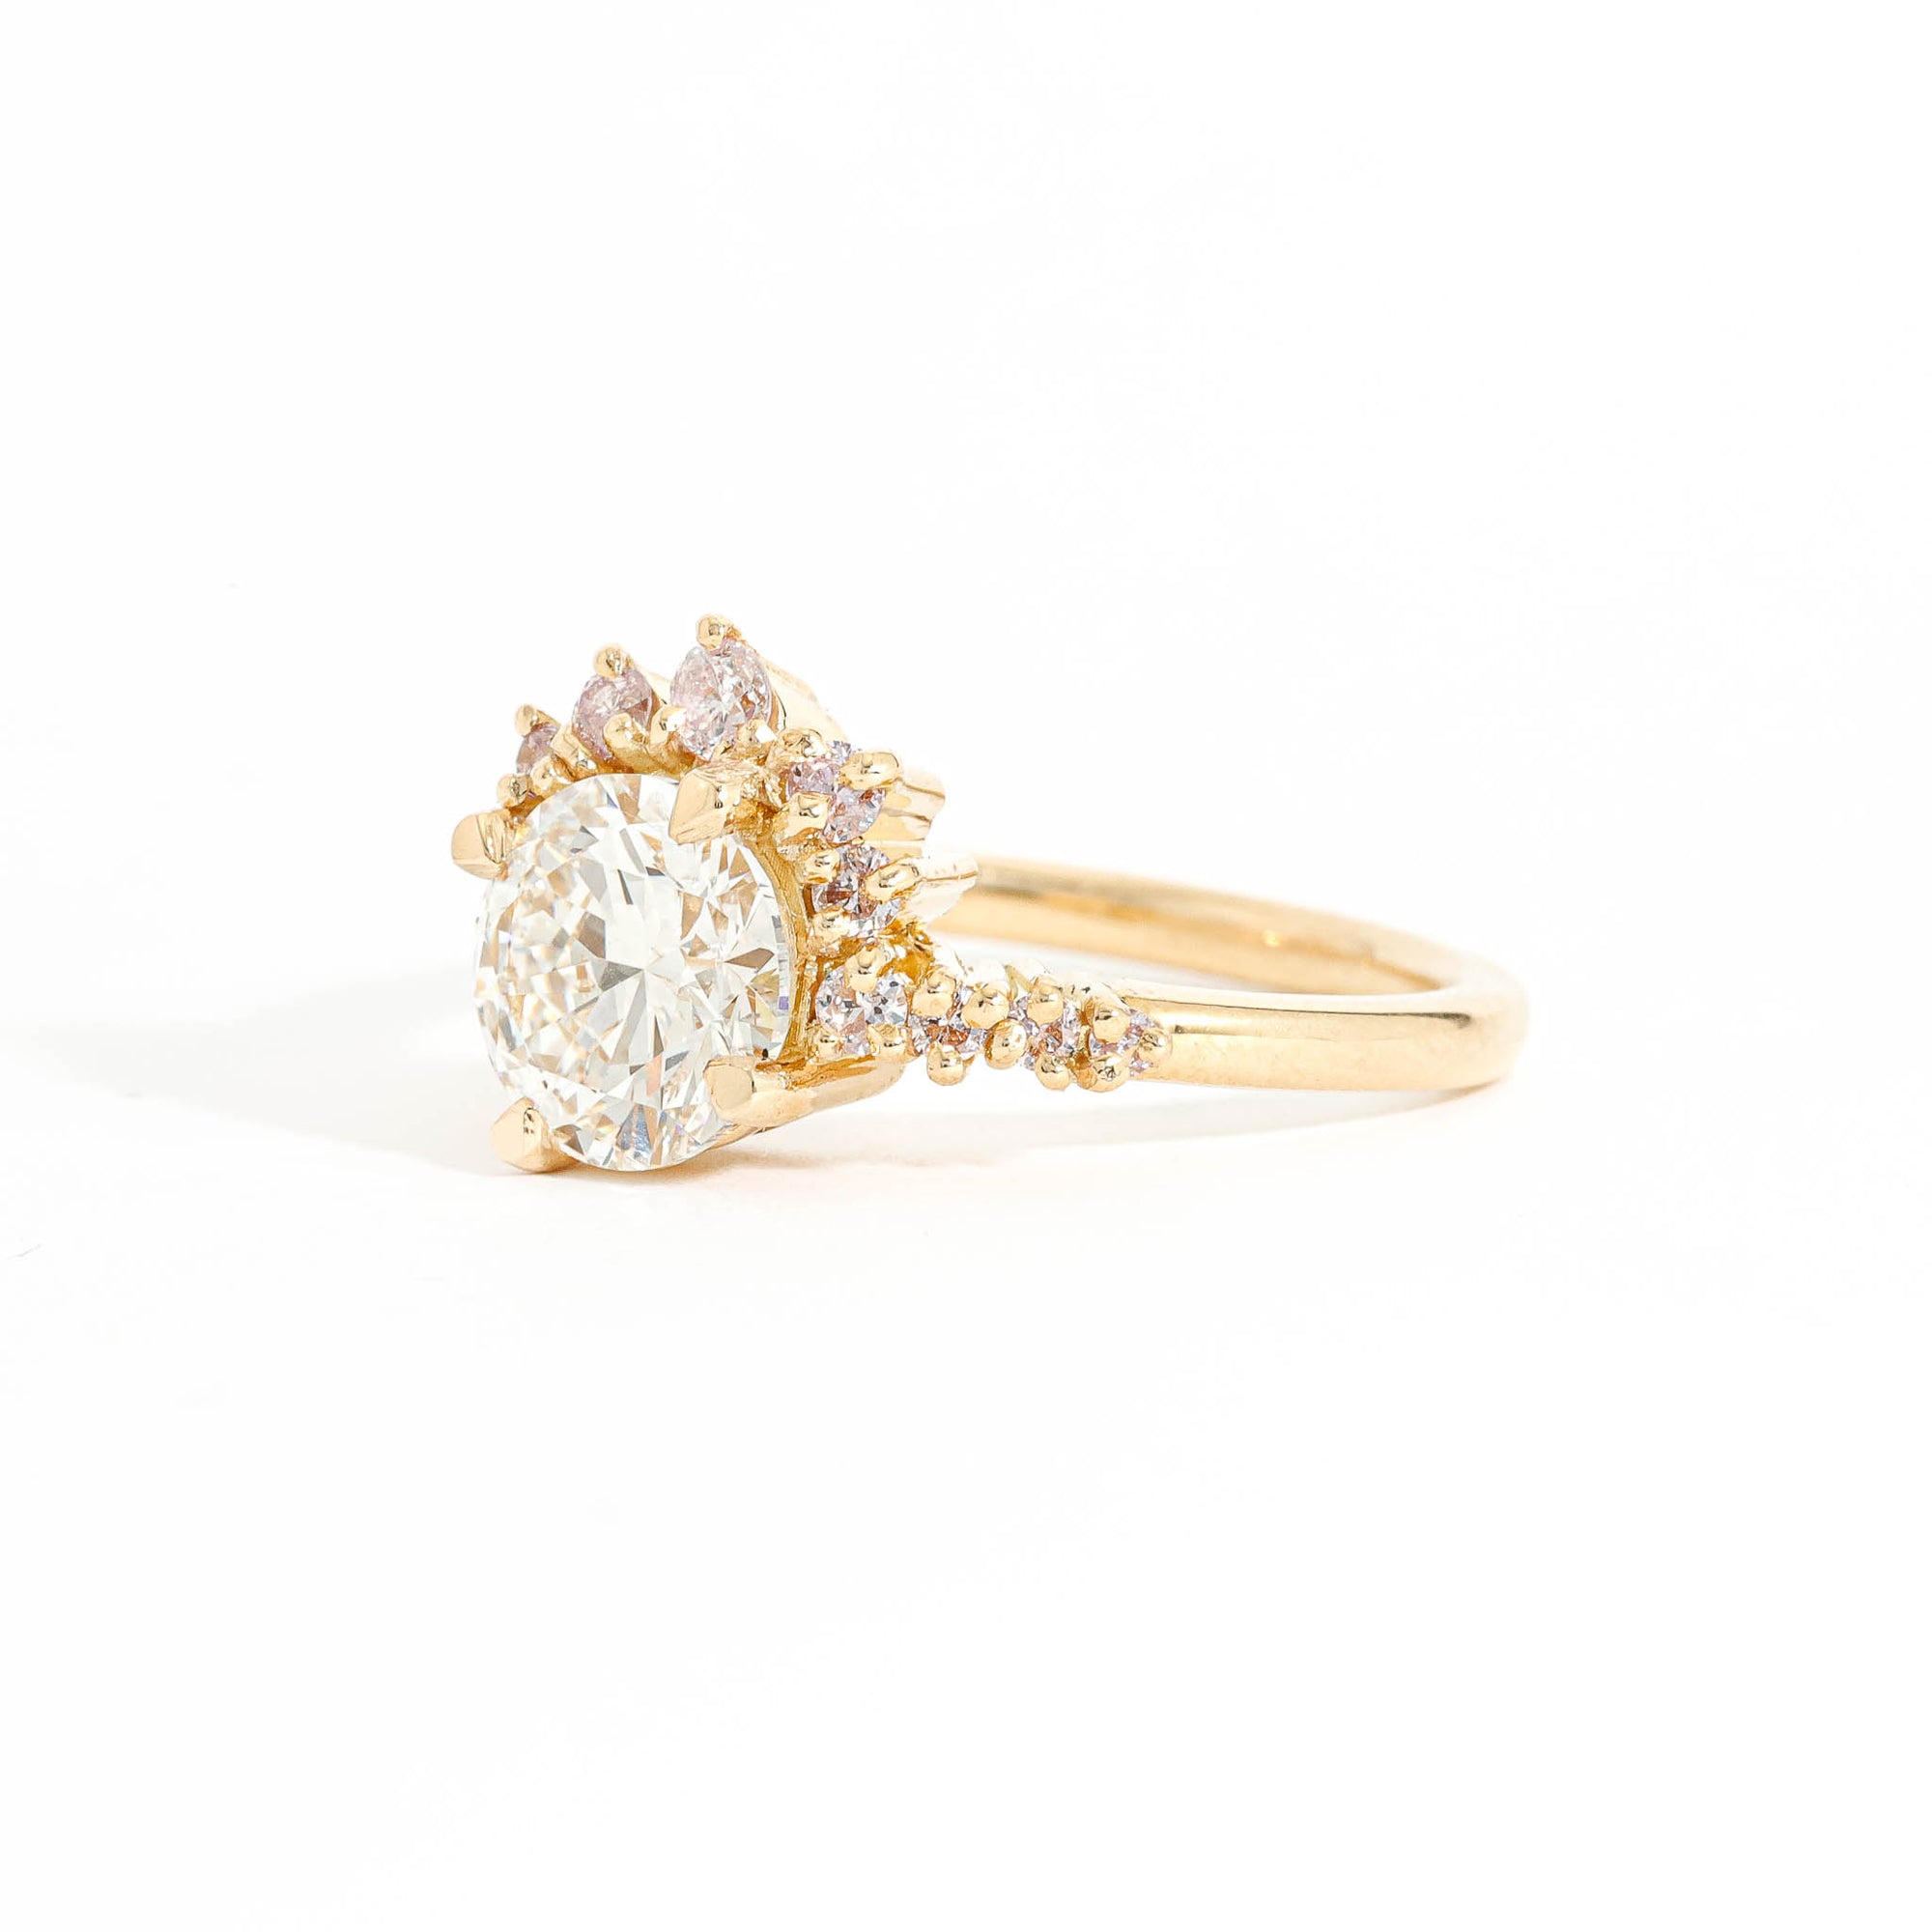 Round Brilliant Cut White and Pink Diamond Half Halo Ring in 18 Carat Yellow Gold